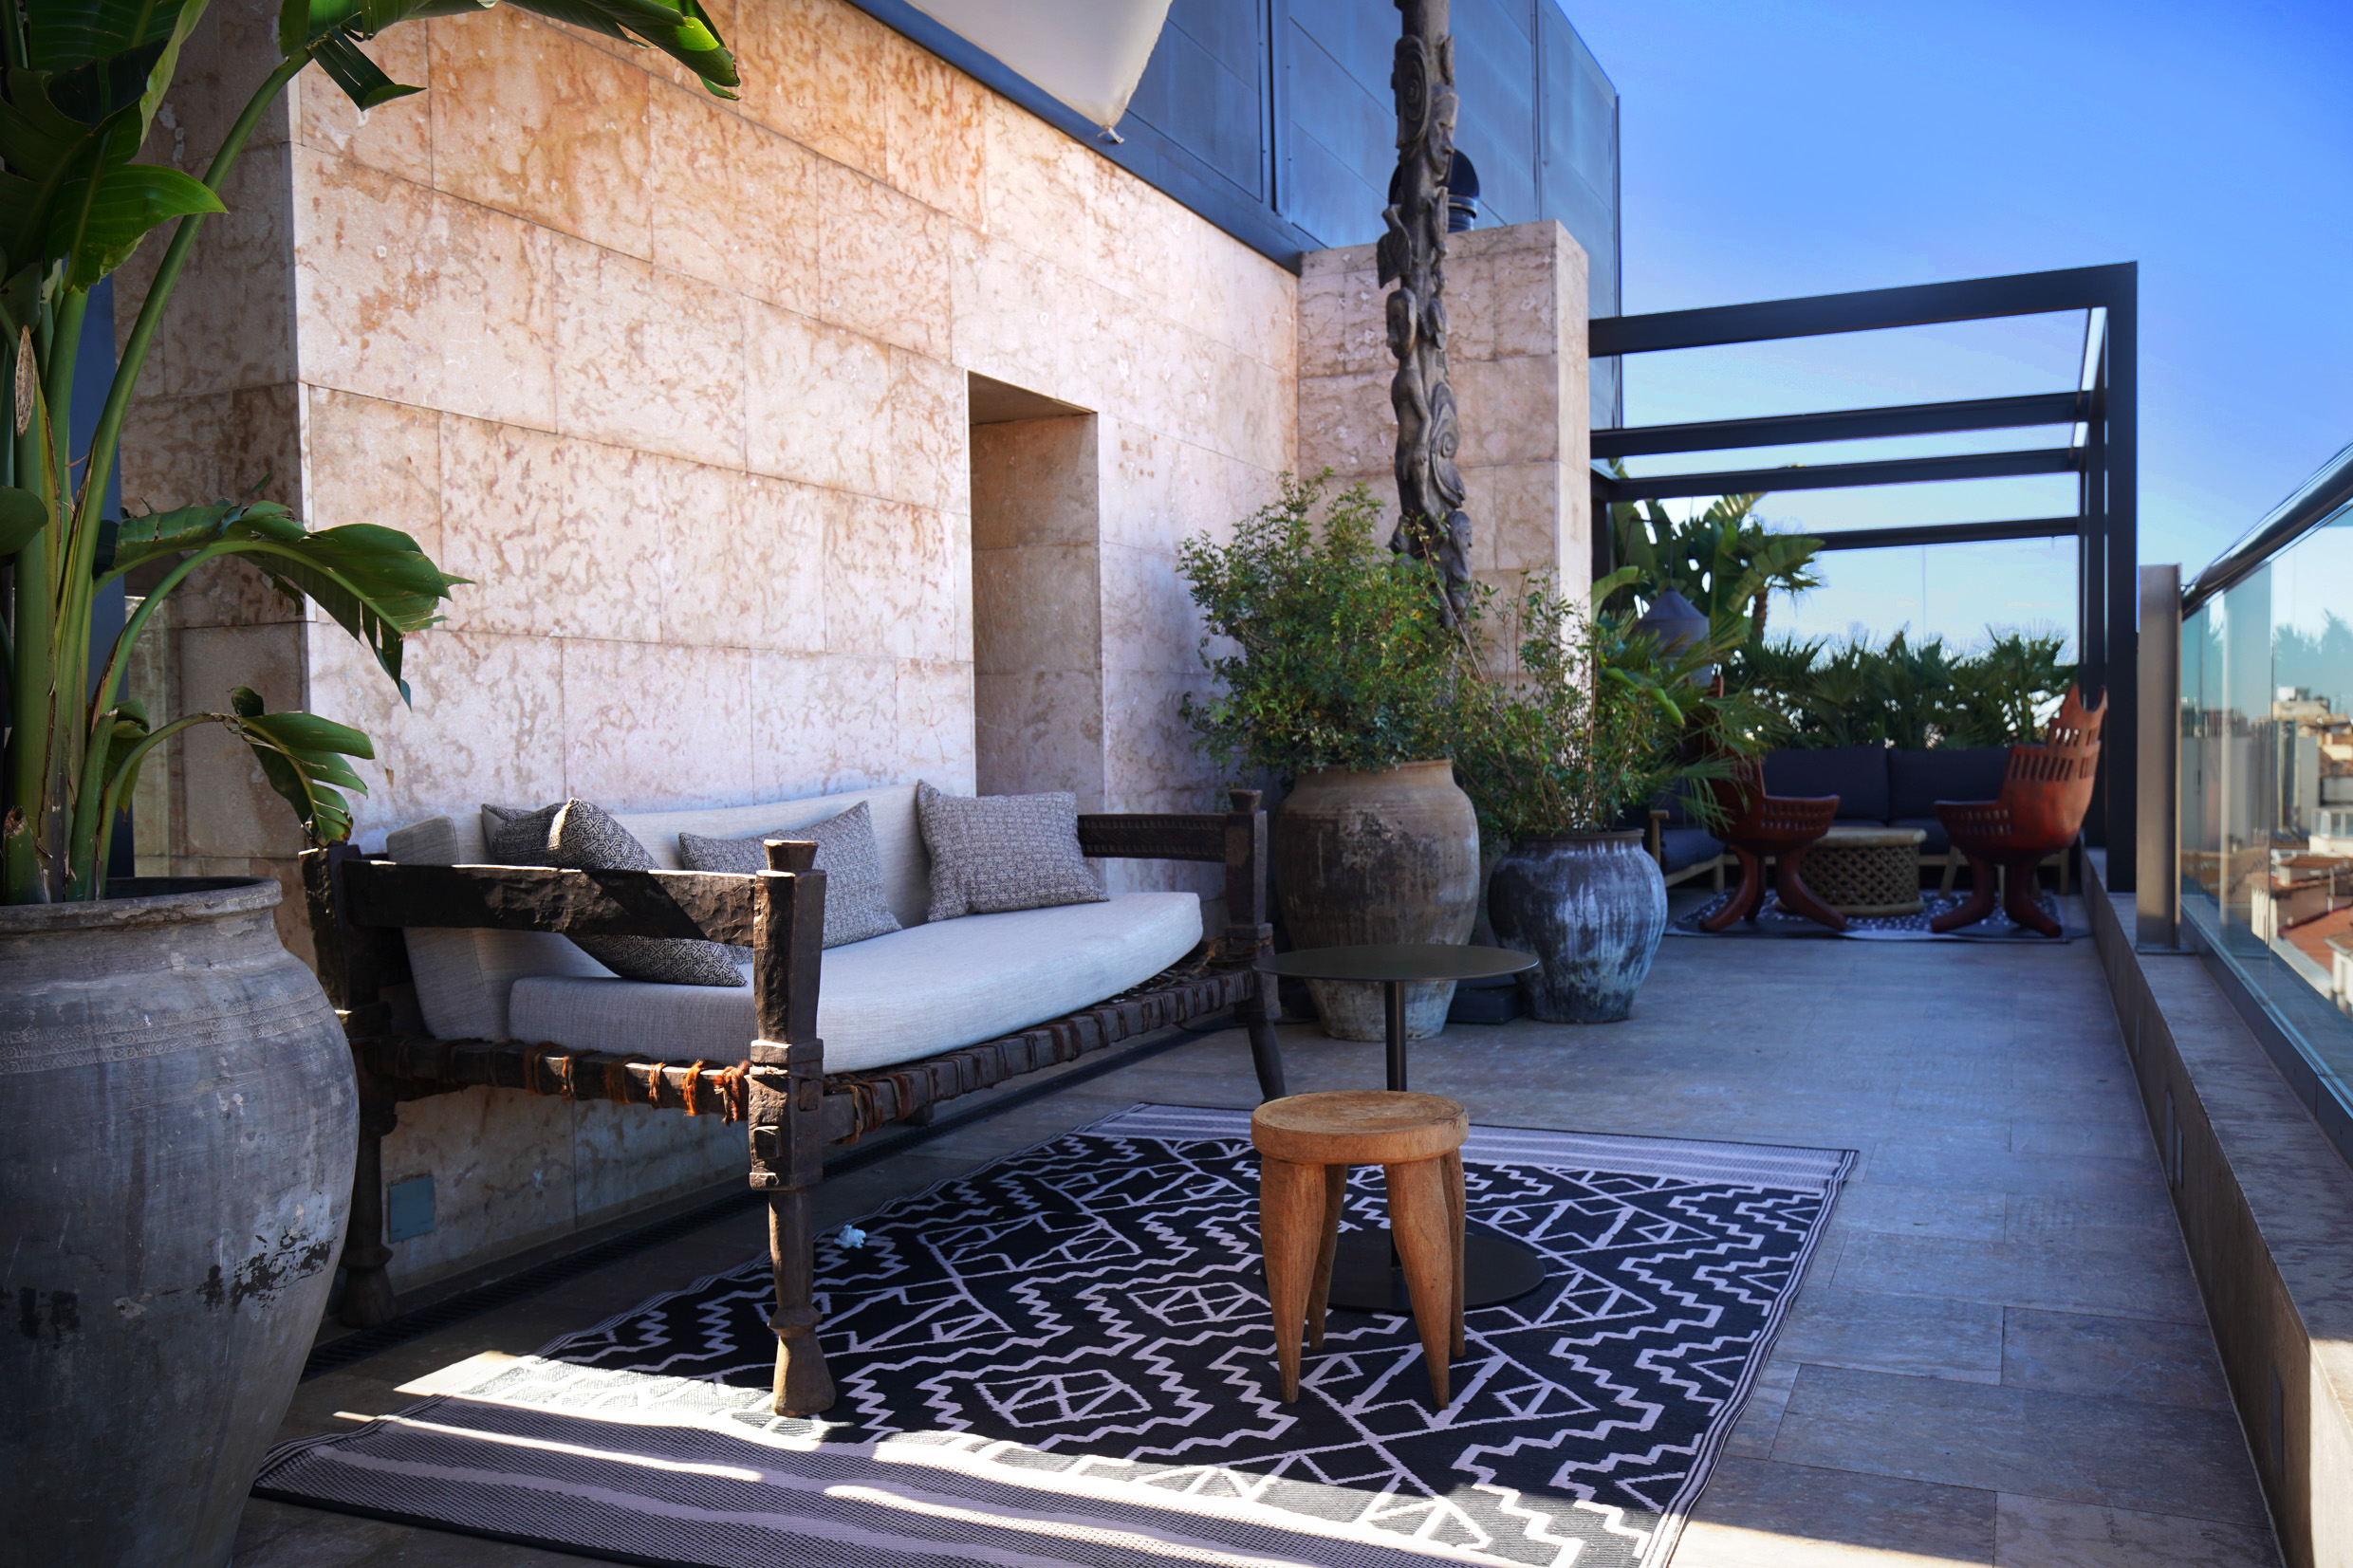 La Terraza Del Urban Summer From The Rooftops Derby Hotels Collection Blog Magazine